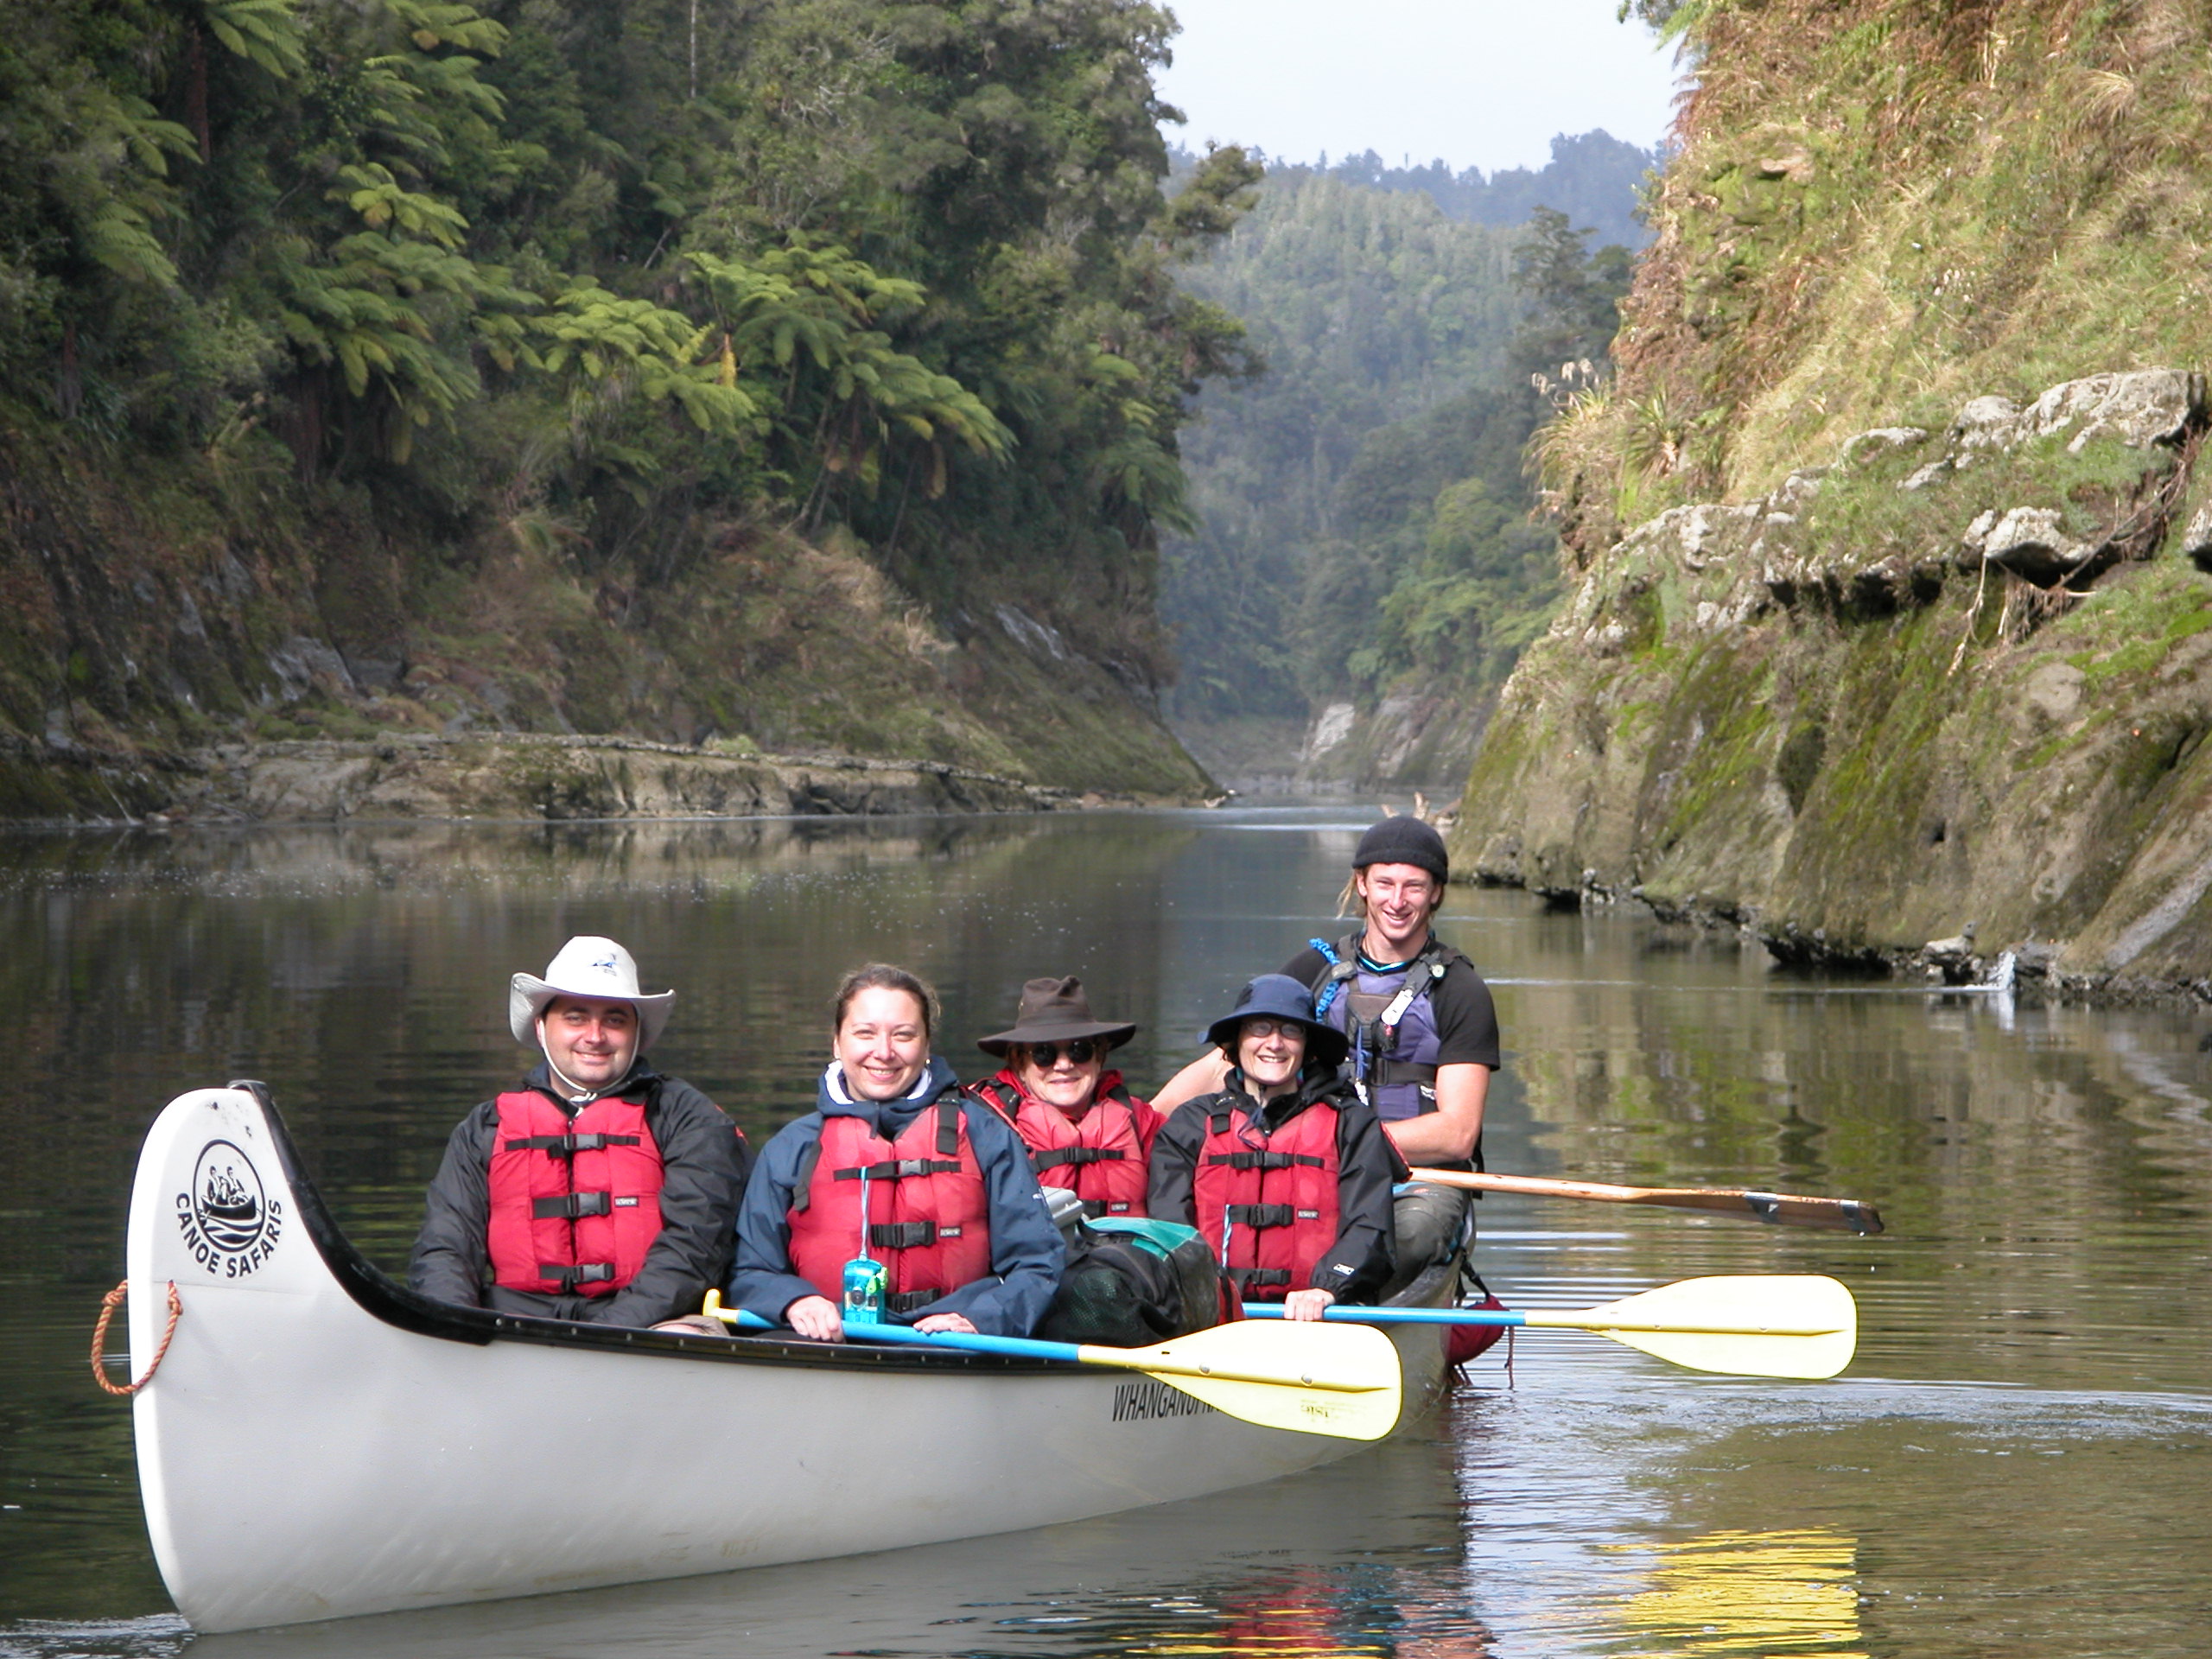 Whanganui National Park Canoe Trip incl. All Meals & Accommodation - Options for Adult or Child, & Three, Four, or Five Days